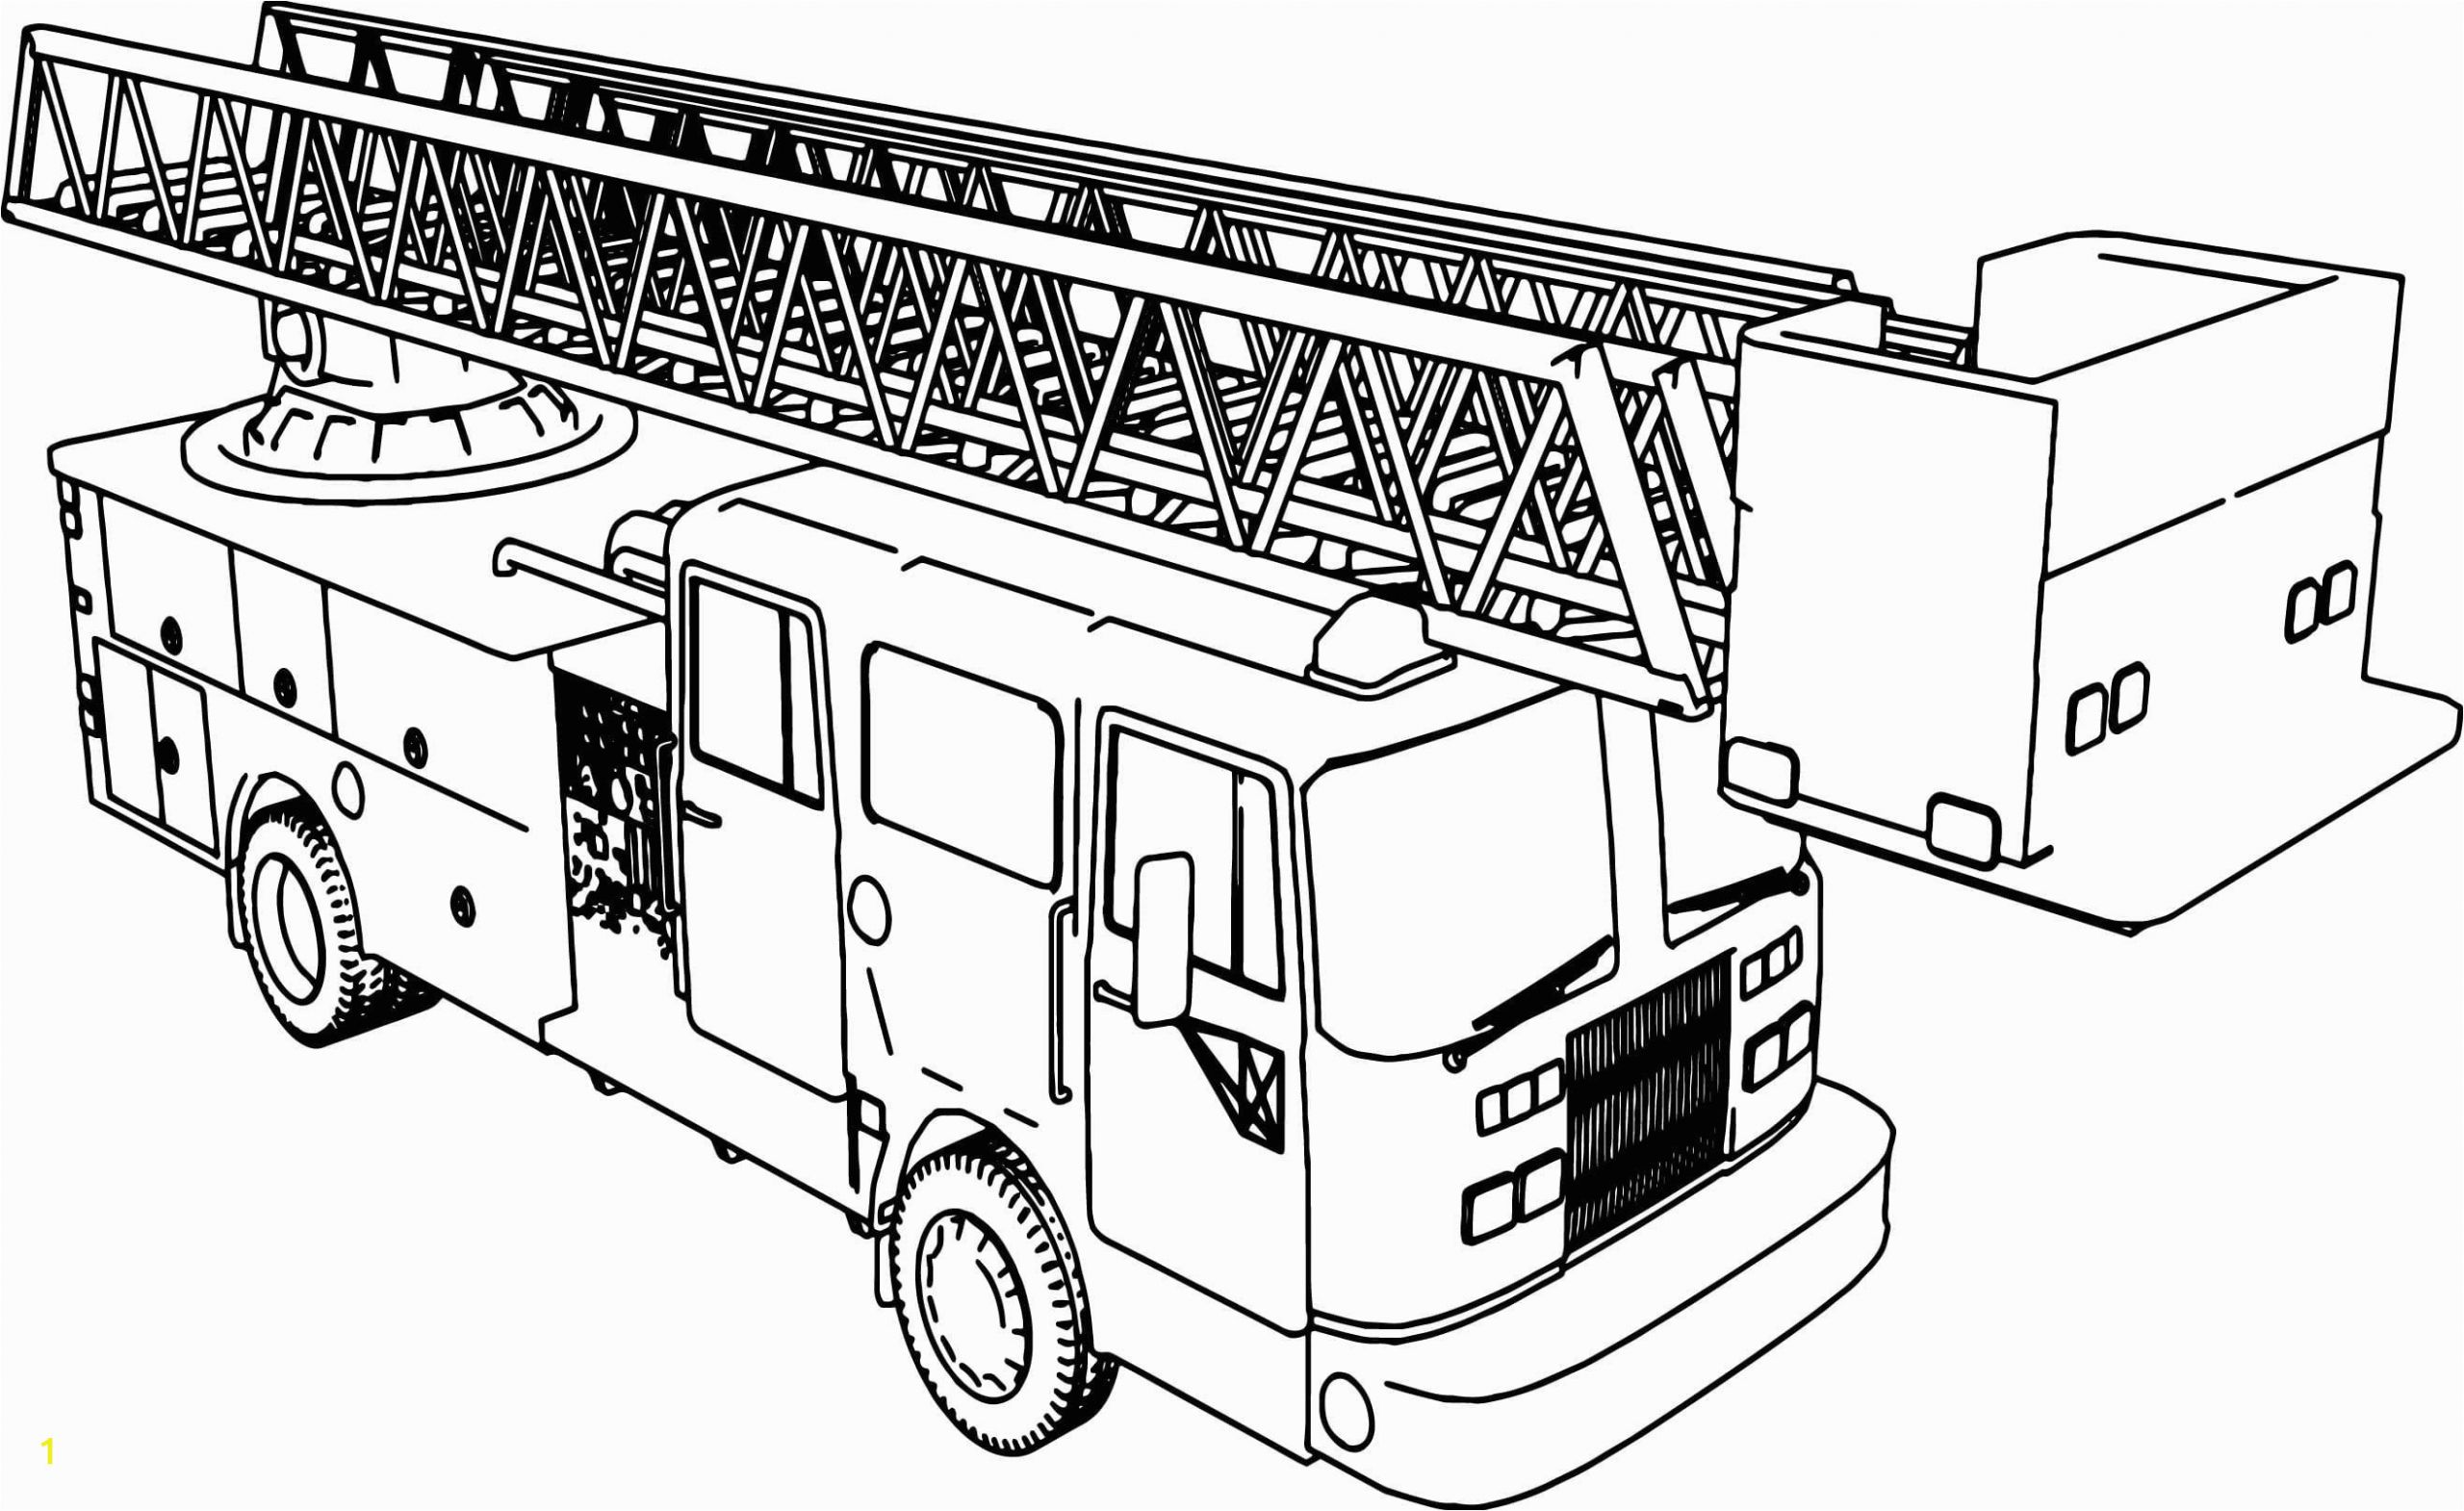 firetruck coloring page